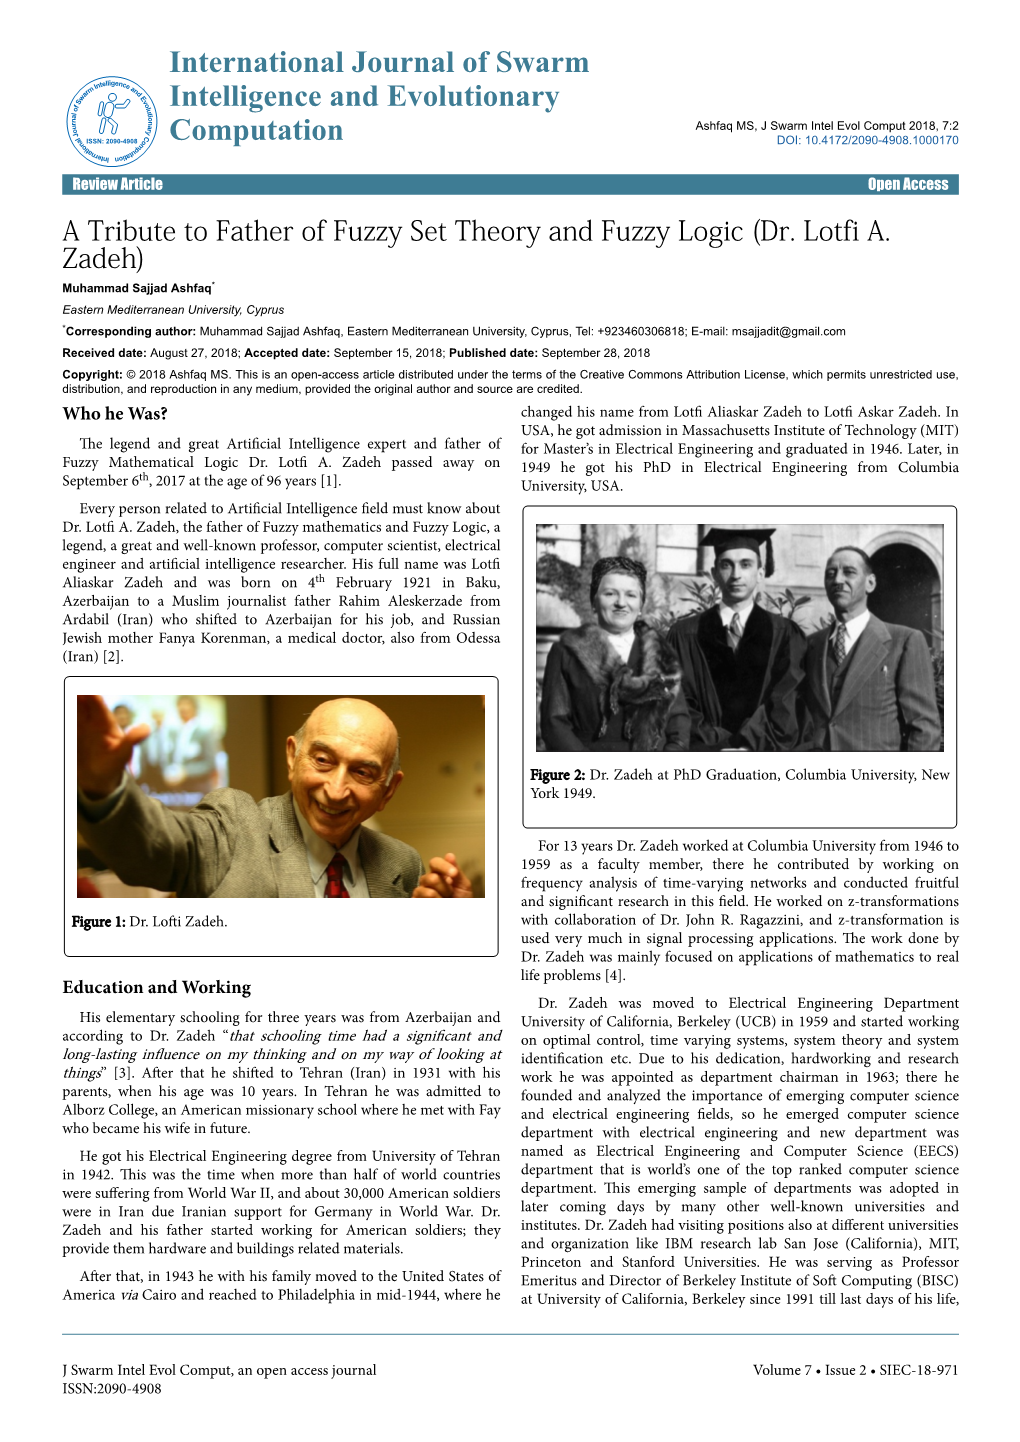 A Tribute to Father of Fuzzy Set Theory and Fuzzy Logic (Dr. Lotfi A